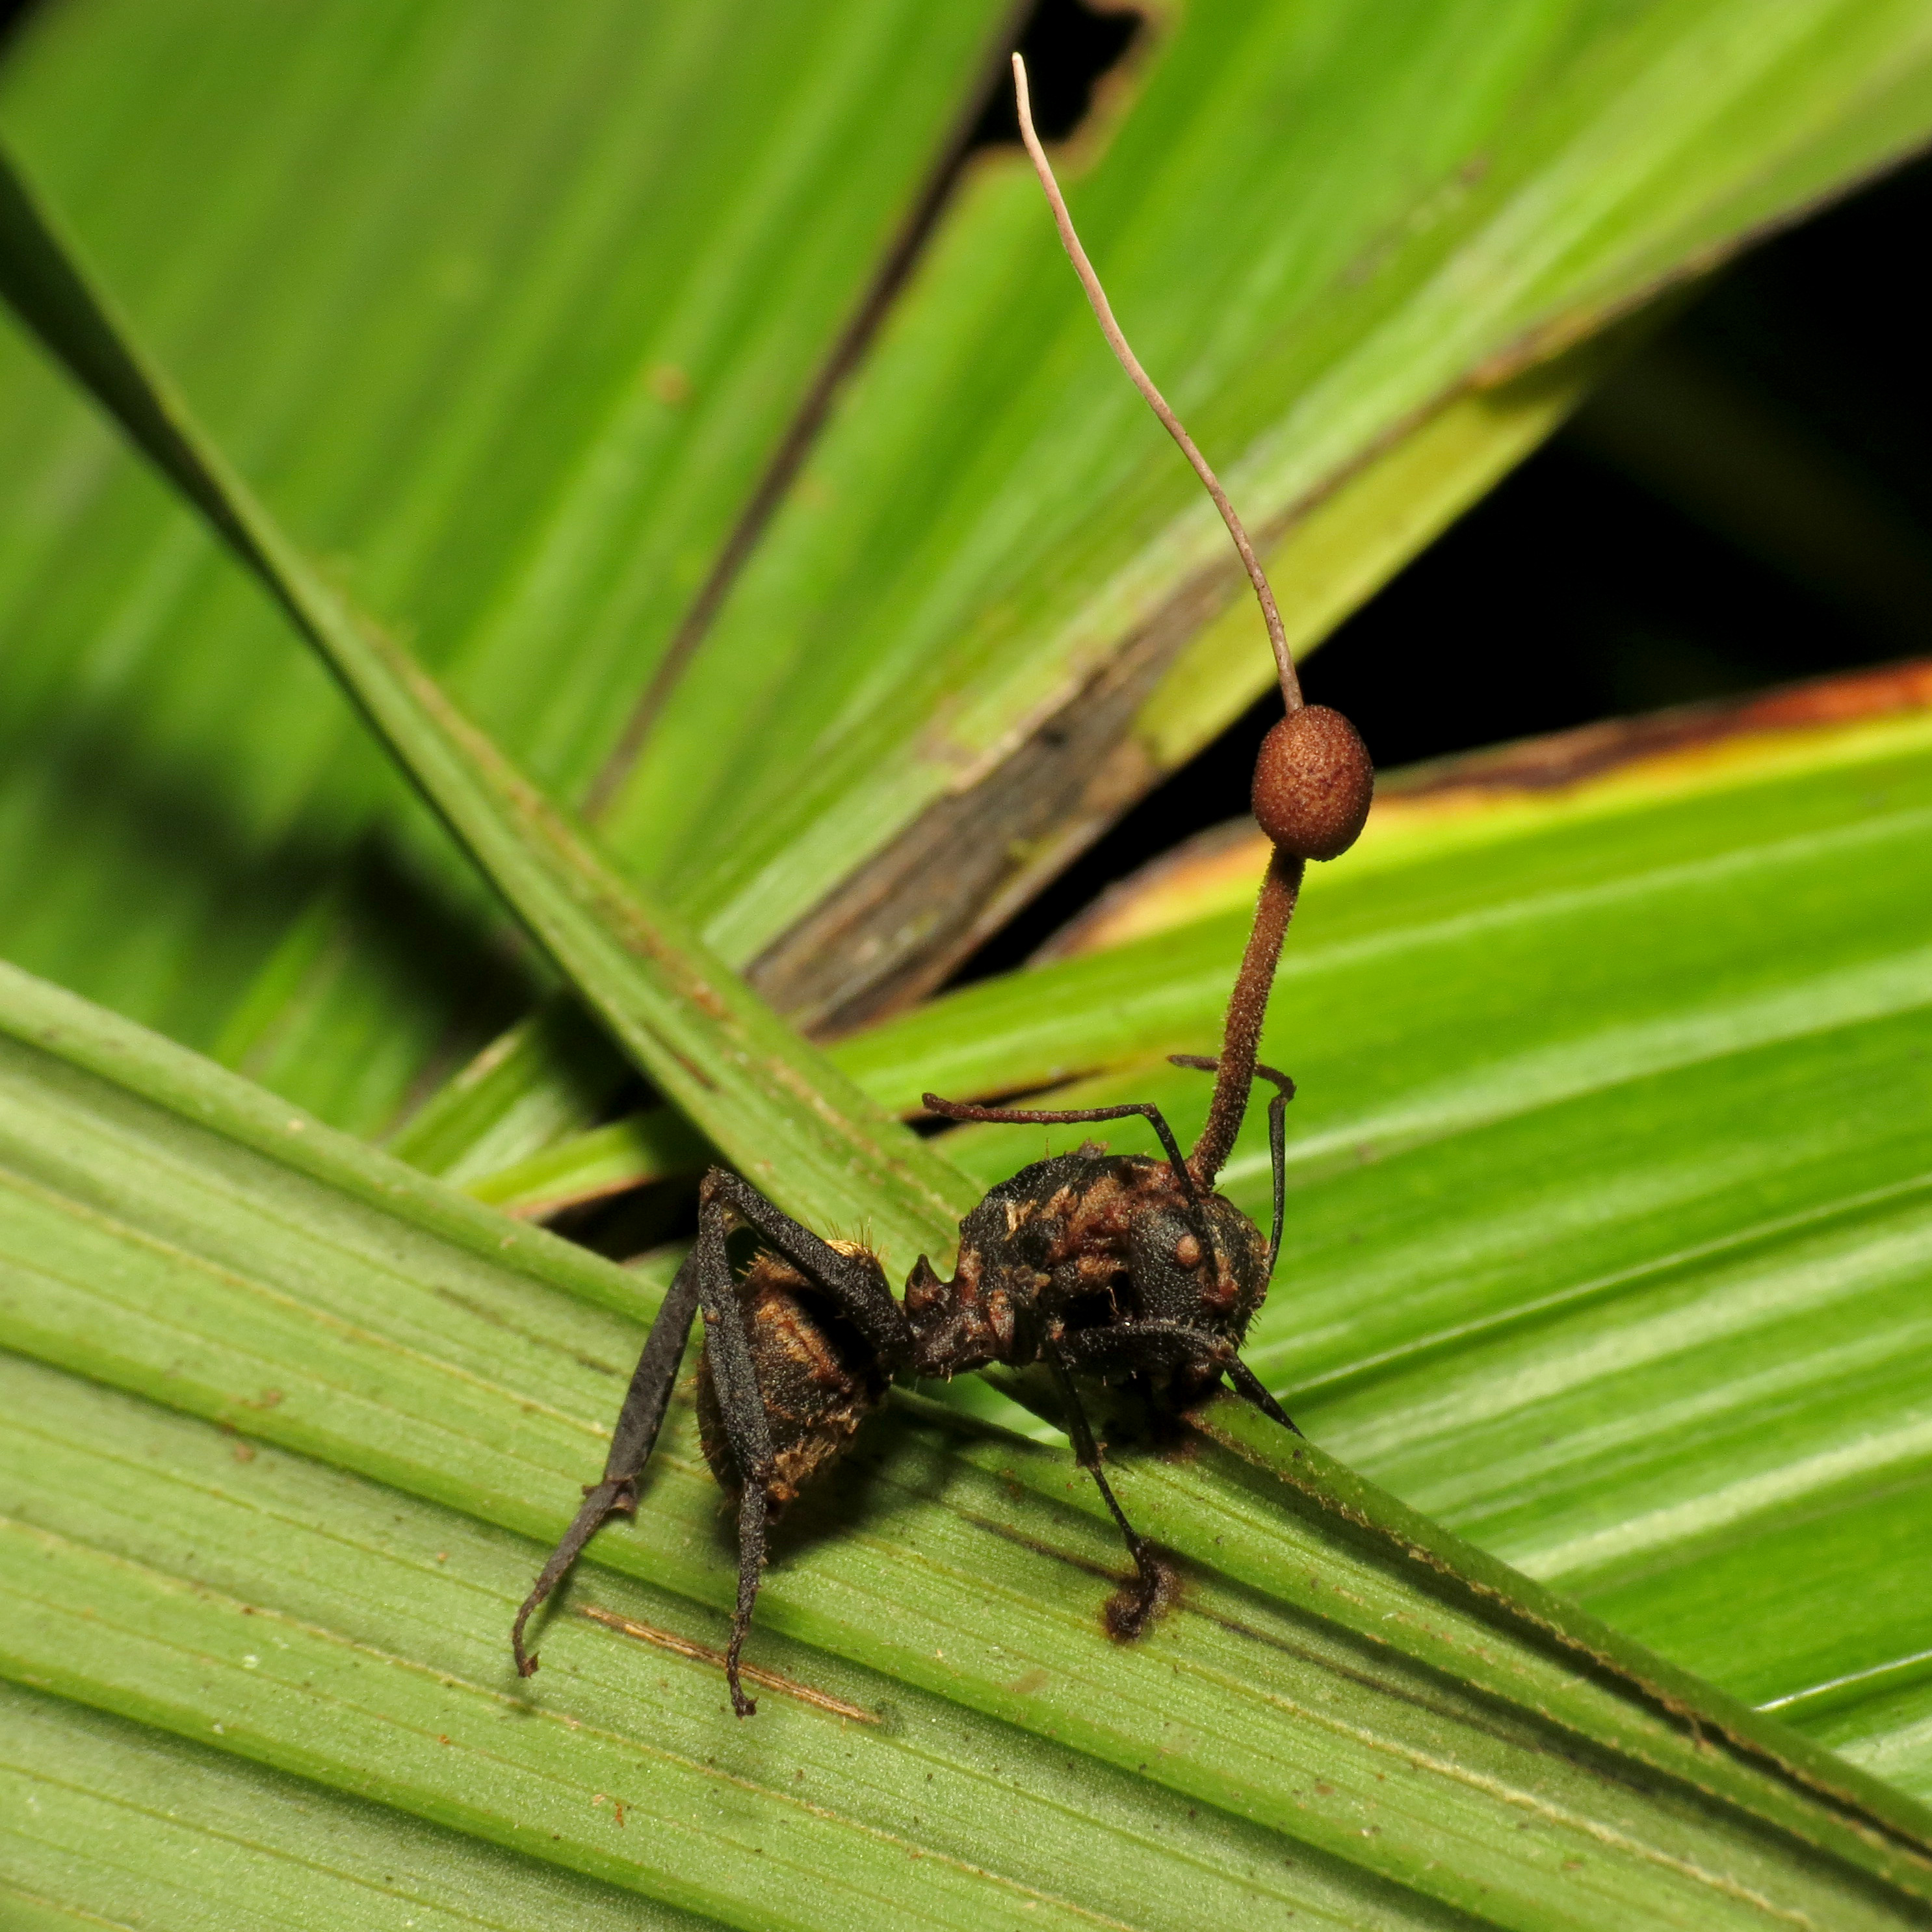 An ant after being infected and killed by the parasitic fungus, Ophiocodyceps sp.